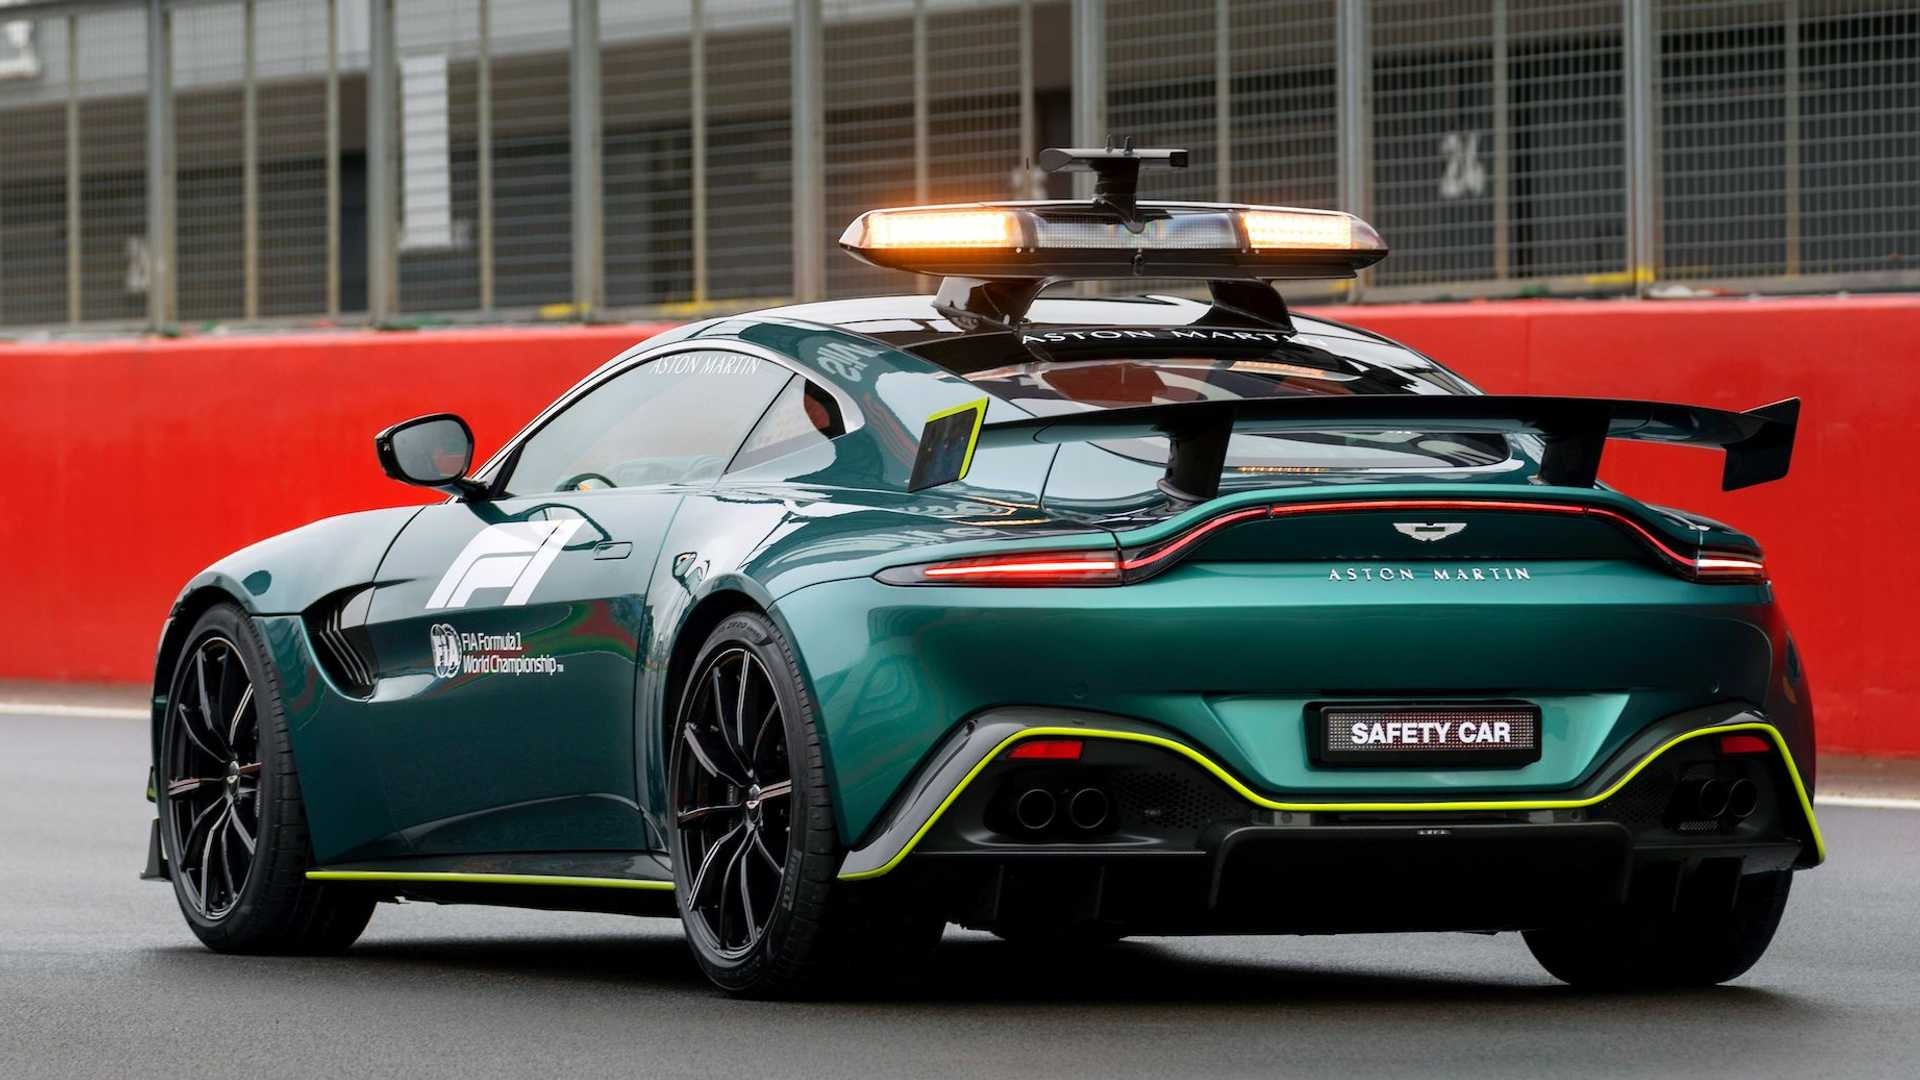 official-formula-1-aston-martin-safety-and-medical-cars-8.jpg